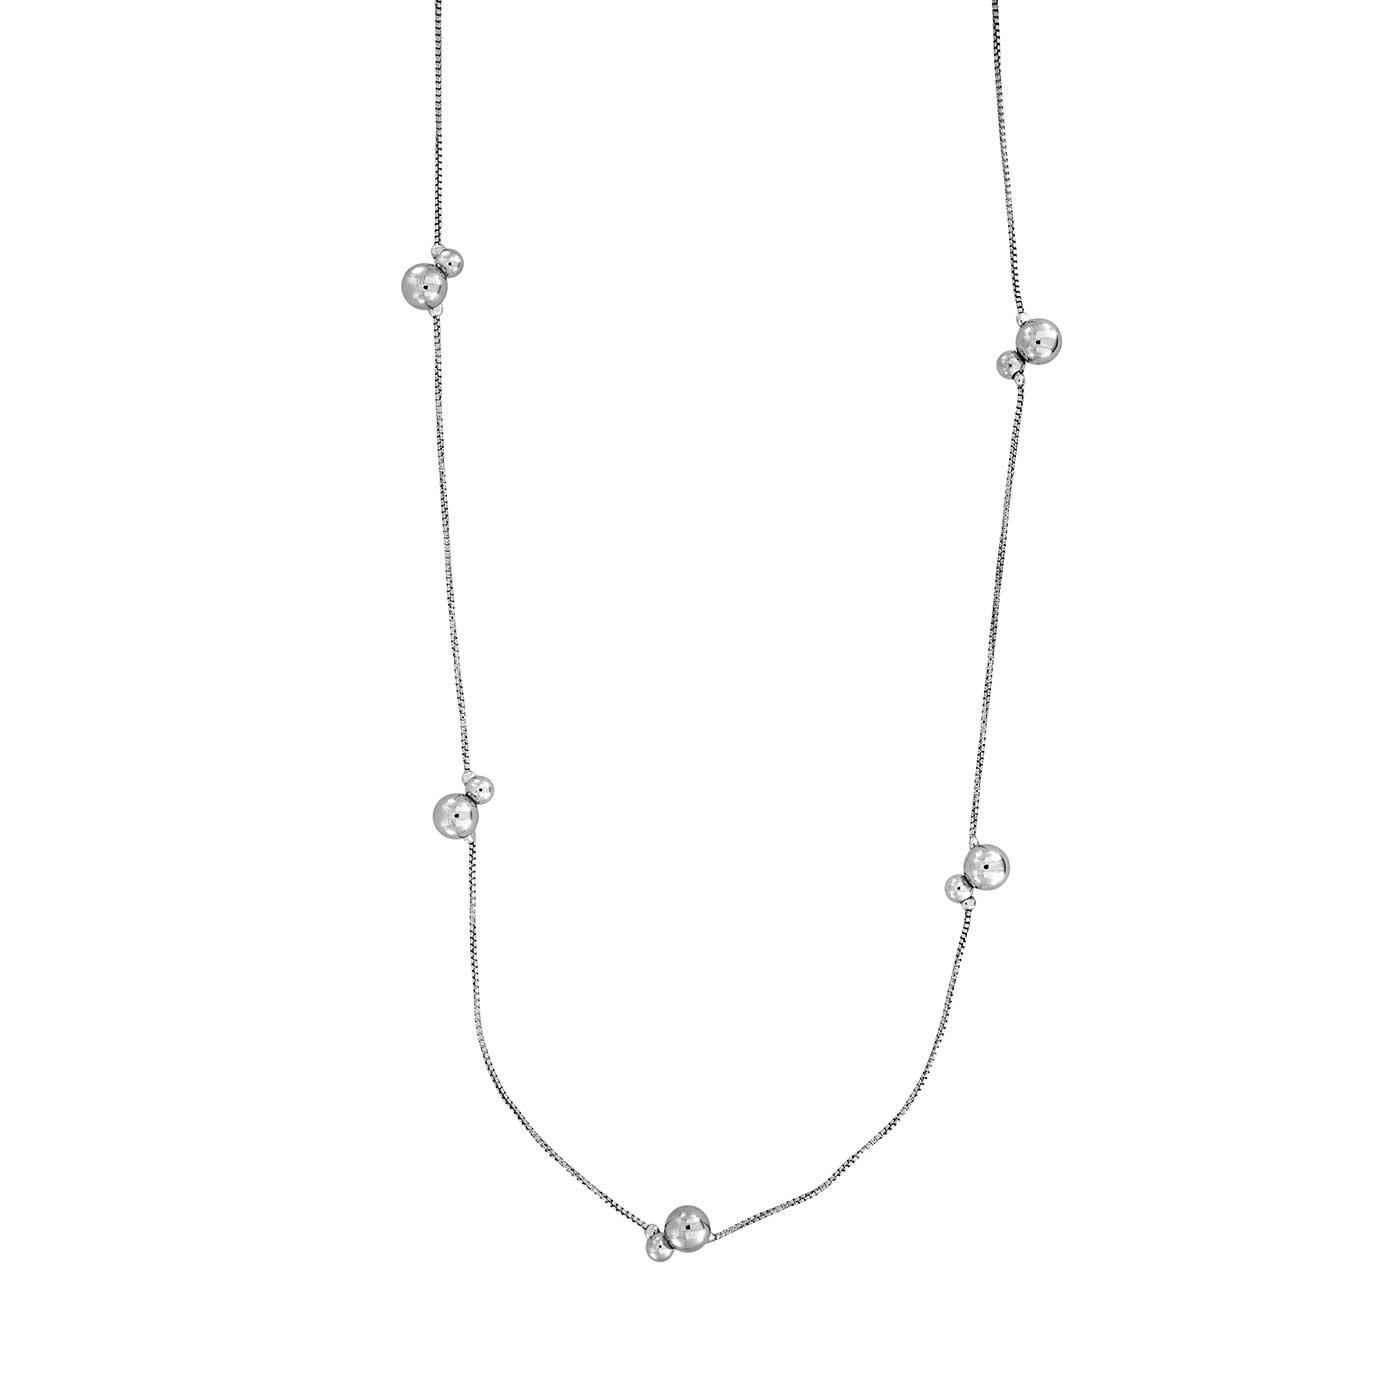 Silver Double Beads Long Necklace